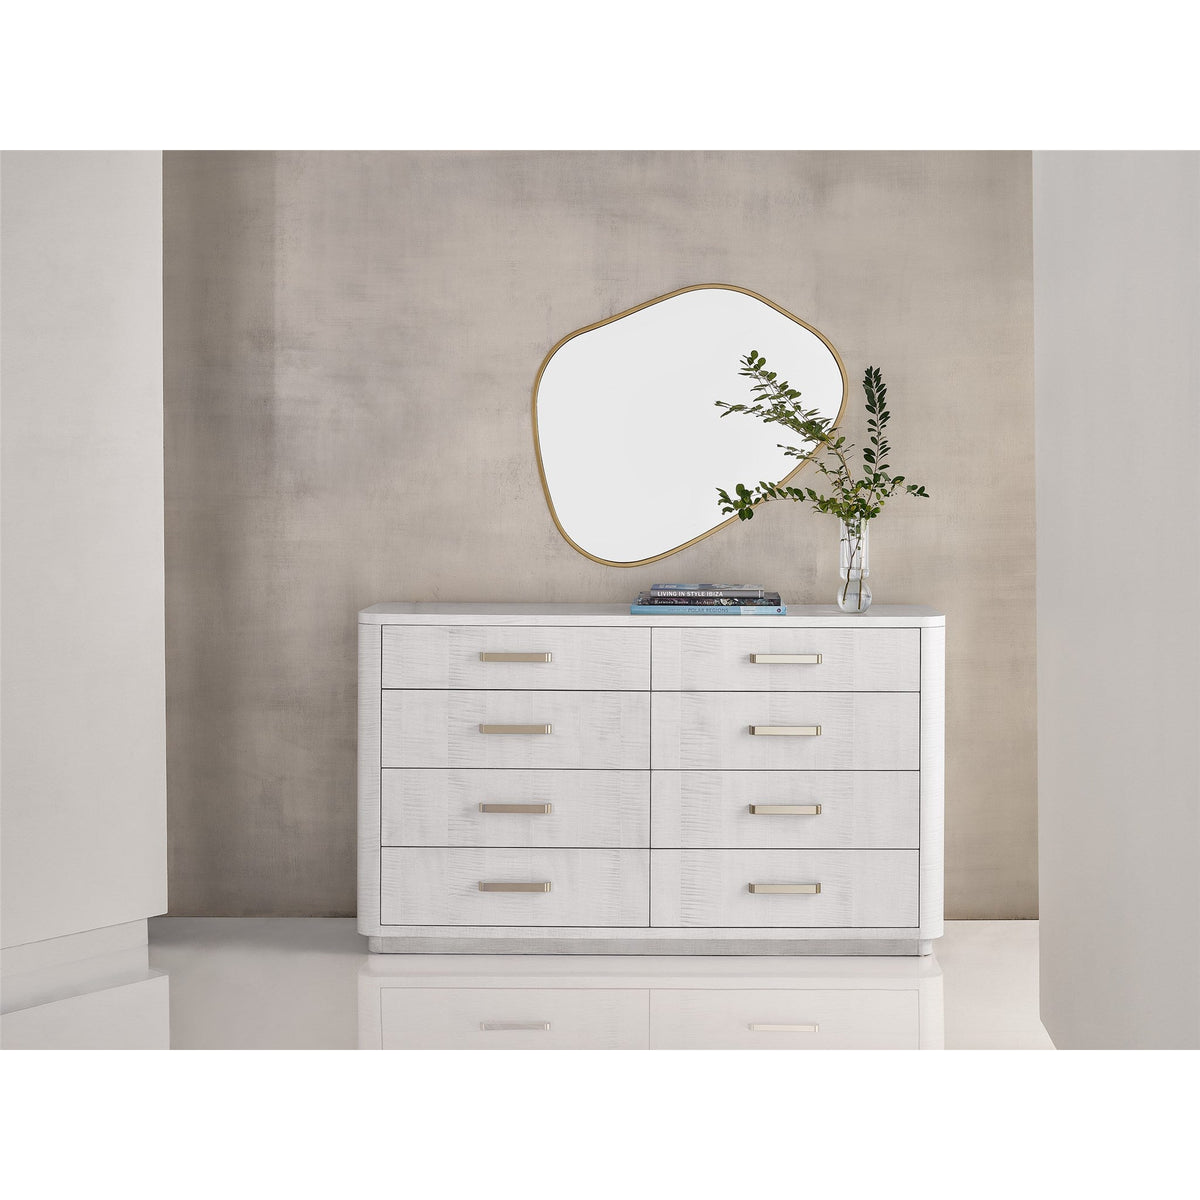 Gallett Accent Mirror Large - Be Bold Furniture